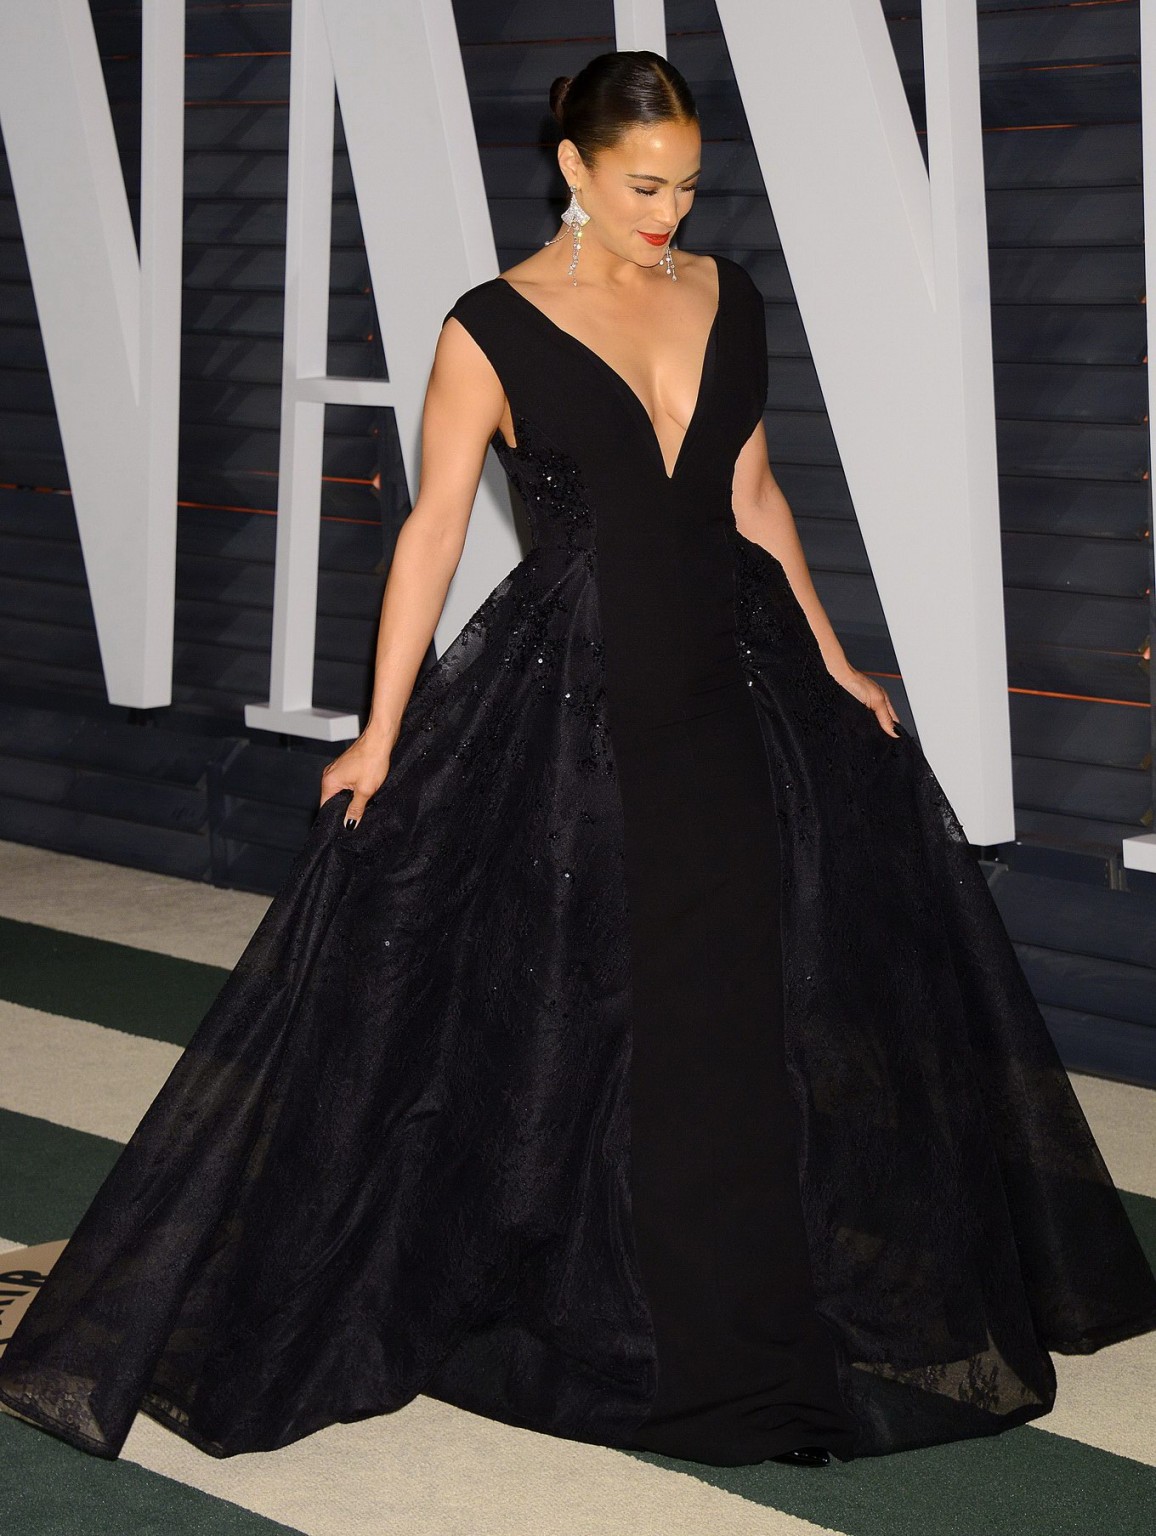 Paula Patton showing huge cleavage at the 2015 Vanity Fair Oscar Party in Hollyw #75171753